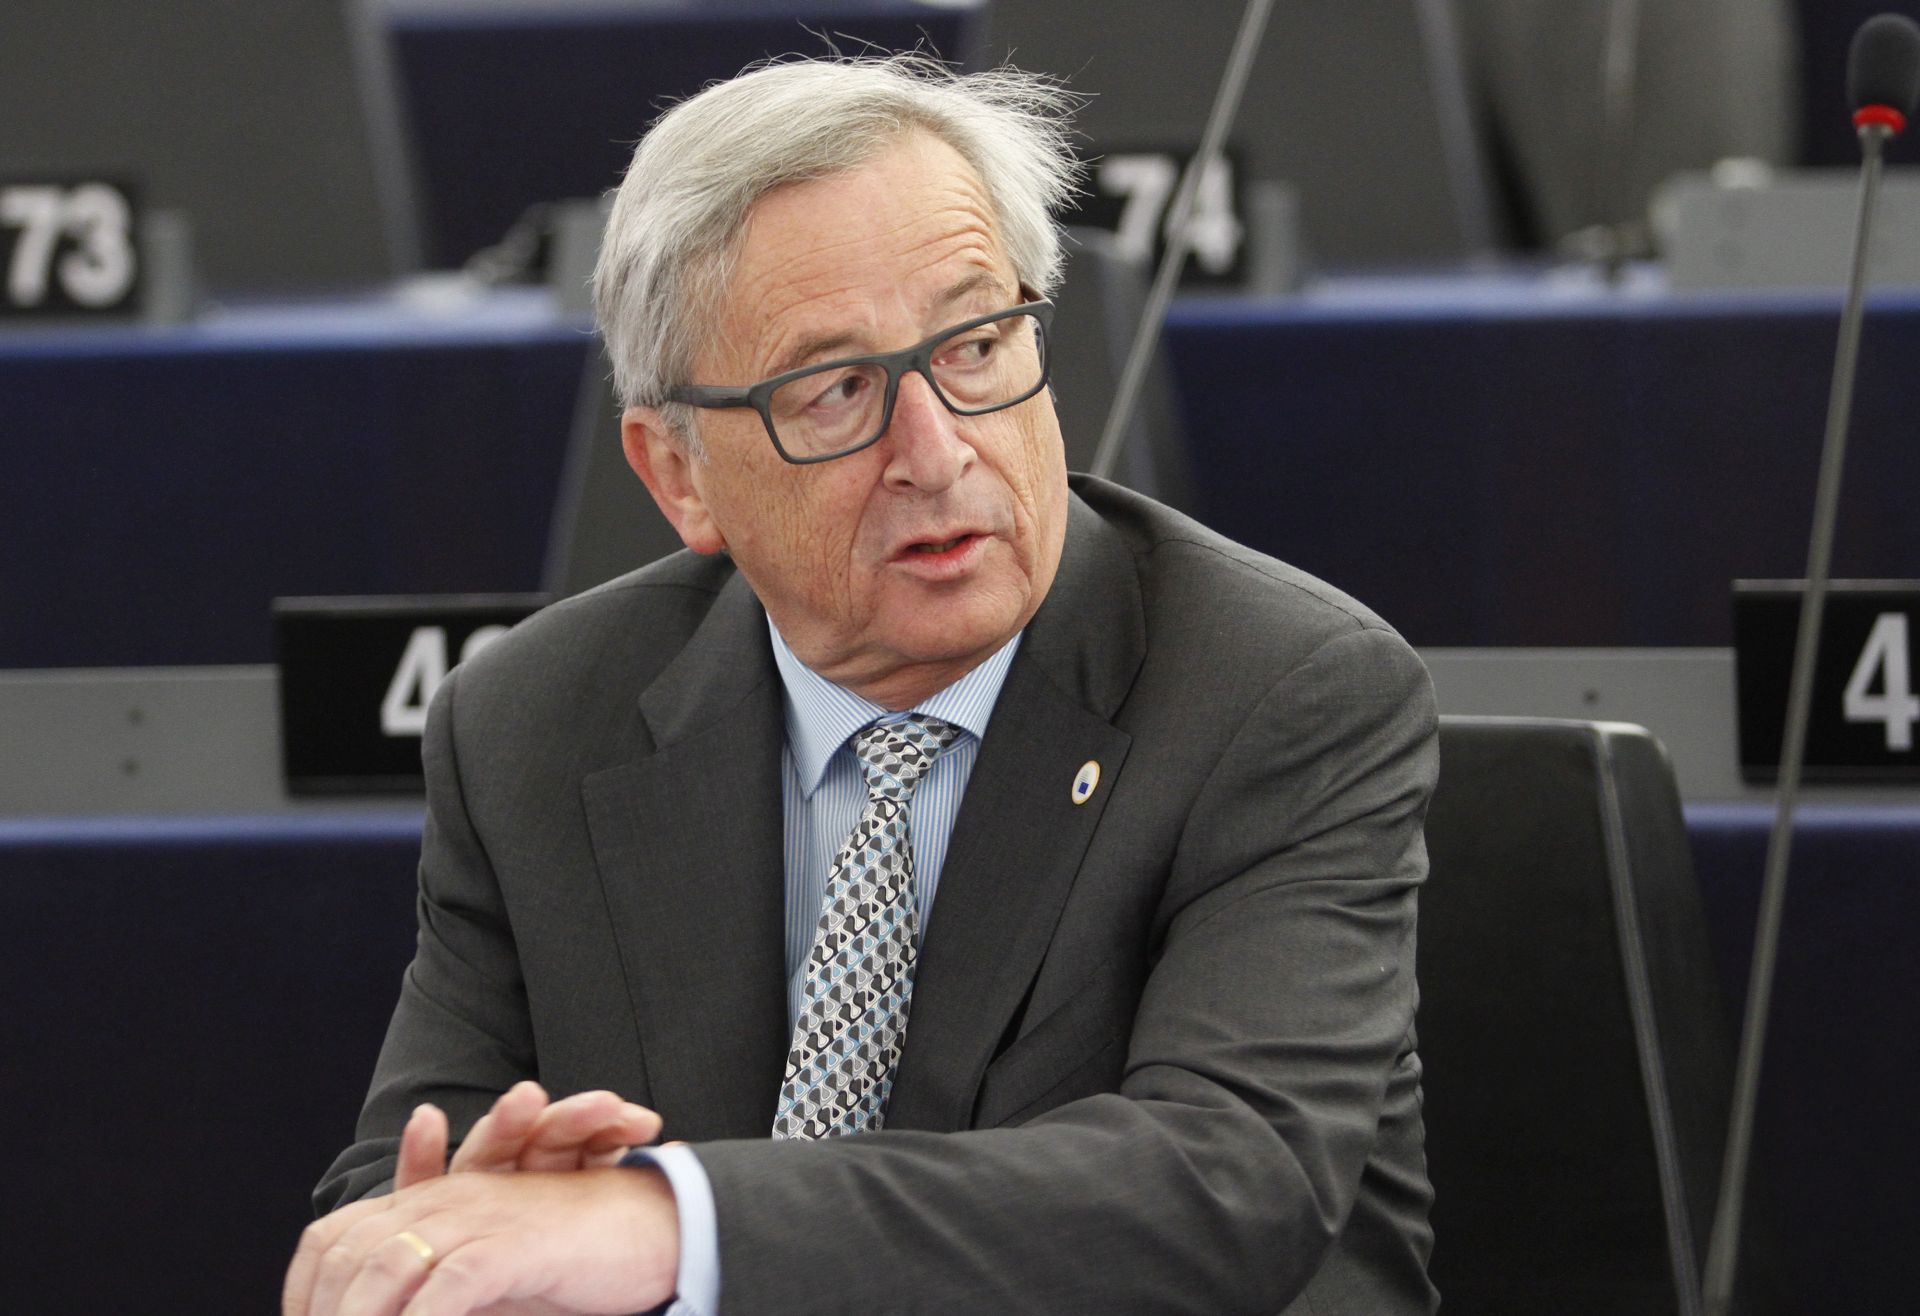 STRASBOURG, FRANCE - JULY 8:   President of the European Commission Jean-Claude Juncker is seen in the plenary hall at the European Parliament on July 8, 2015 in Strasbourg, France. Eurozone member nations have given Greece until Thursday to come up with new proposals to bring the country out of its debt crisis and qualify for further assistance from international creditors. Analysts say that should this final effort fail a departure of Greece from the Eurozone will be inevitable.  (Photo by Michele Tantussi/Getty Images)